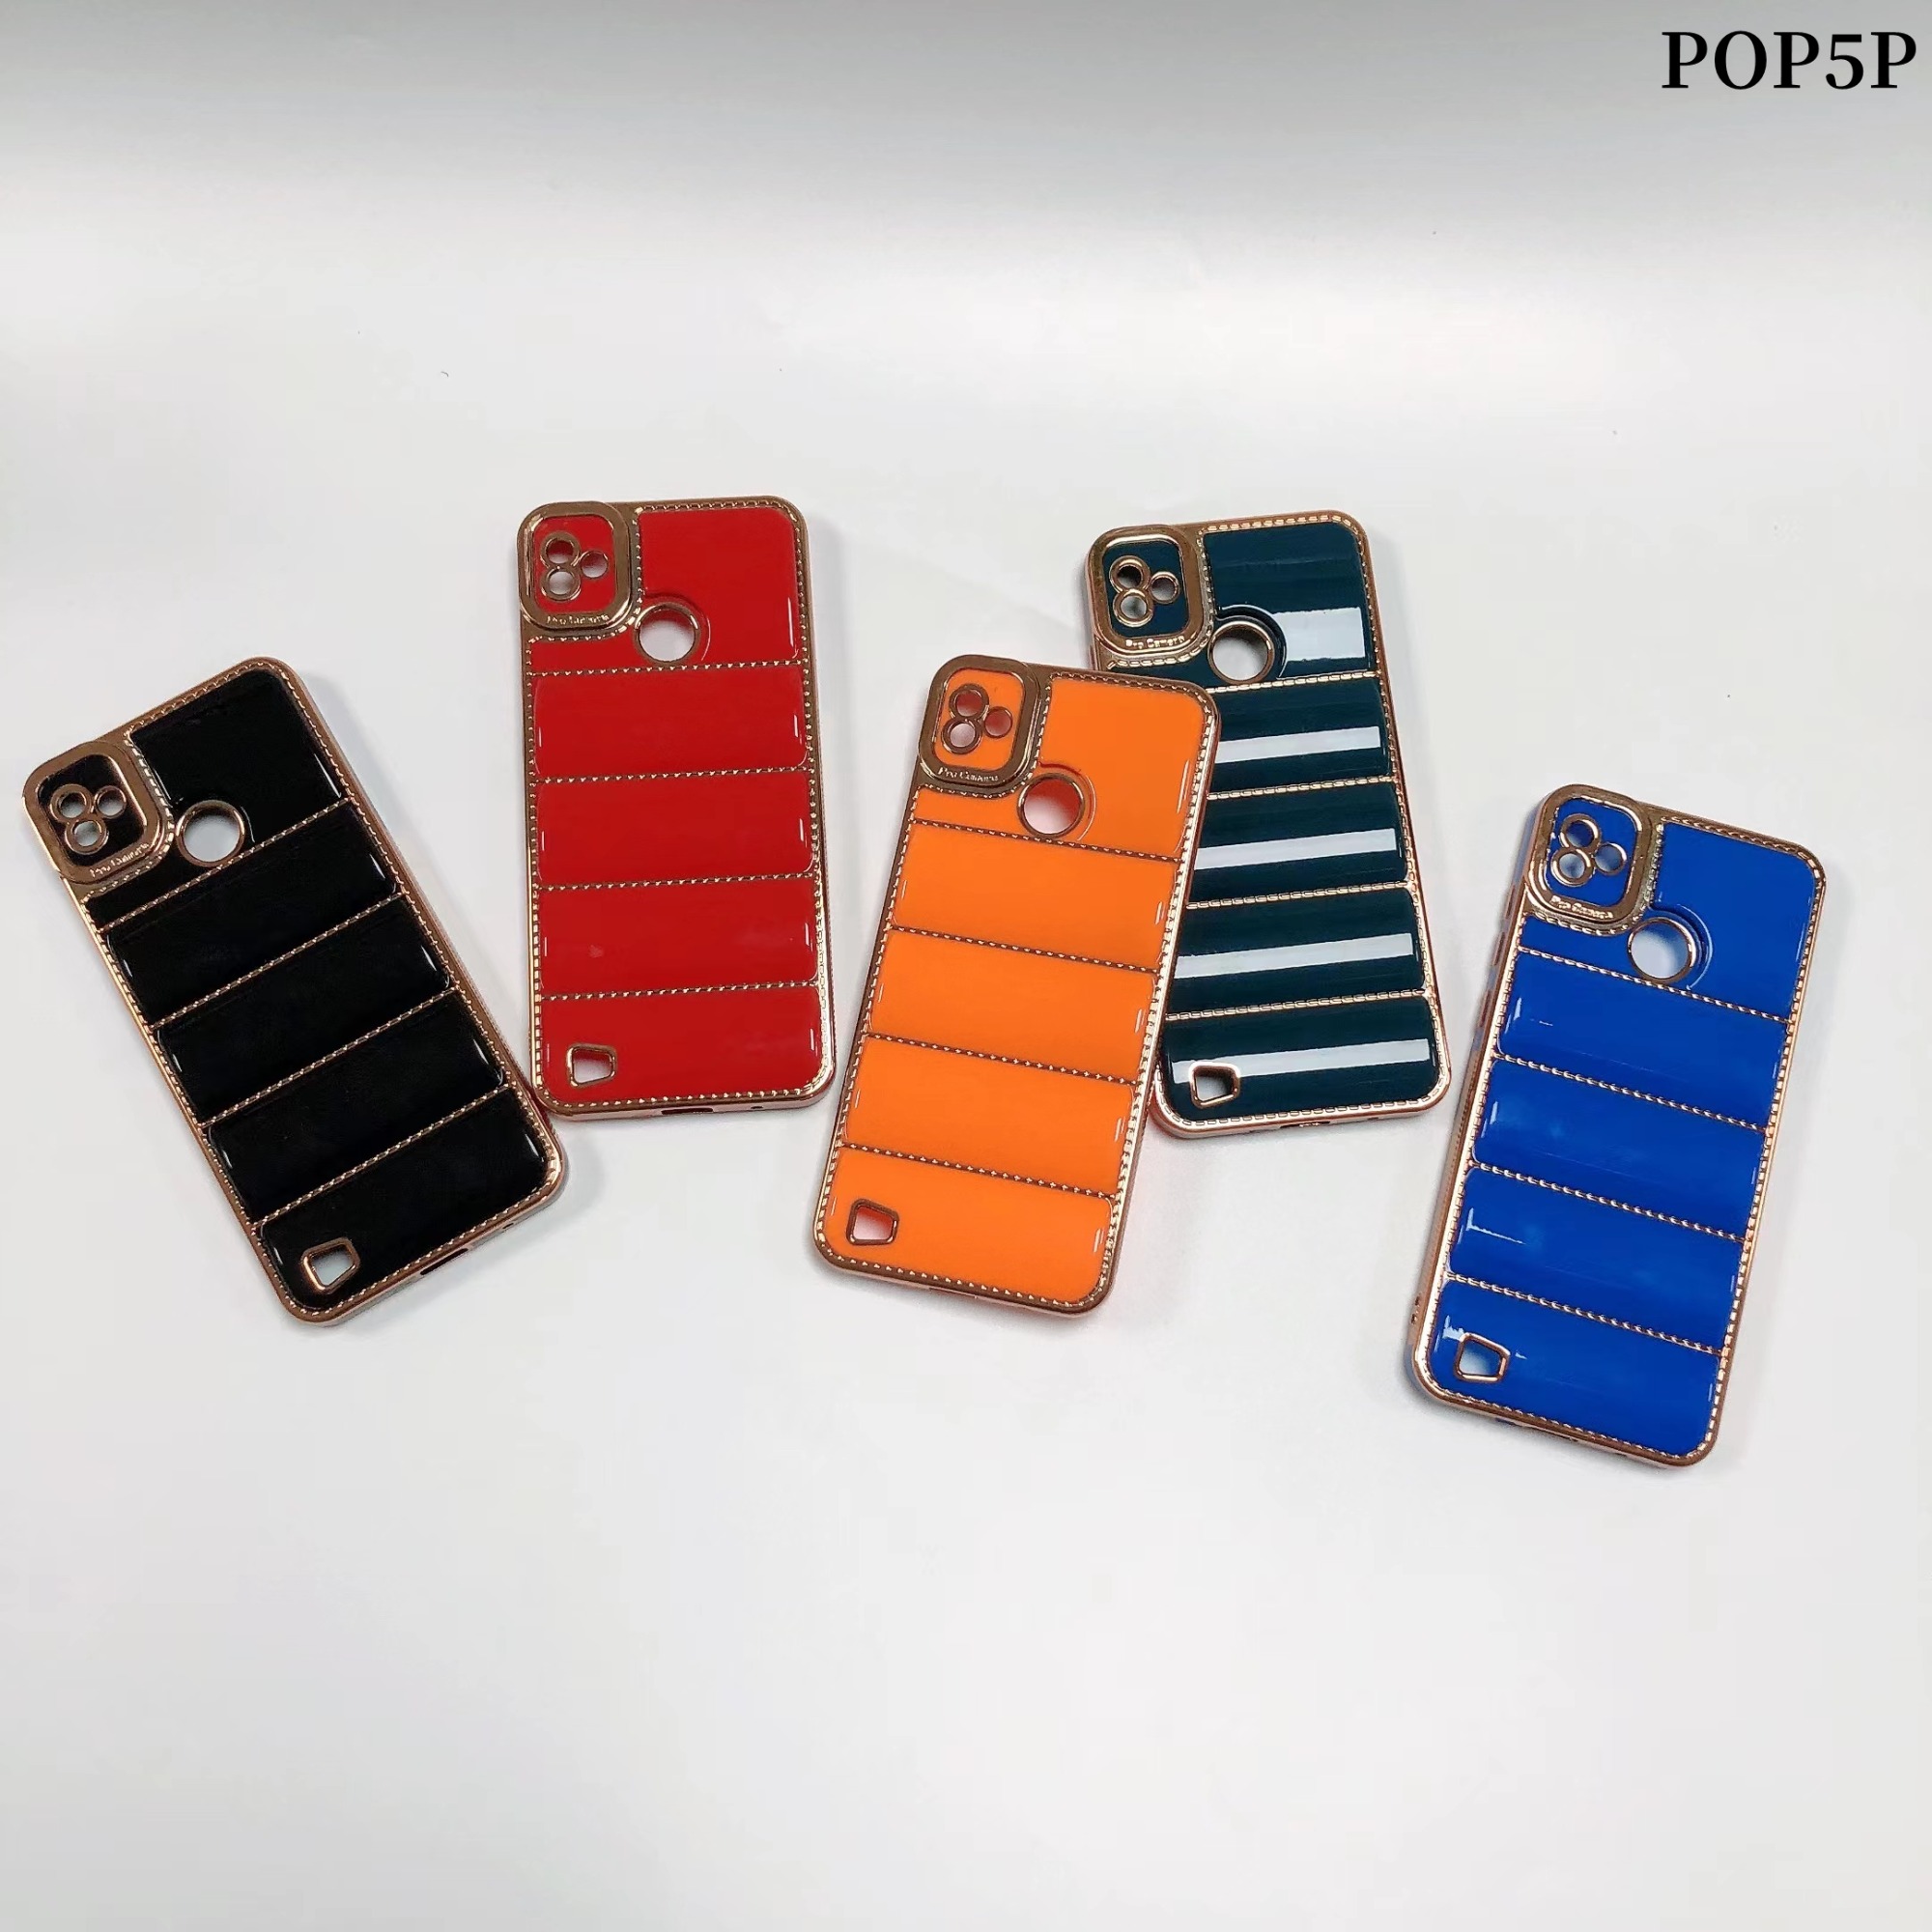 High quality Electroplated down jacket TPU back cover For tecno spark9 pro camon19 camon19pro phone case